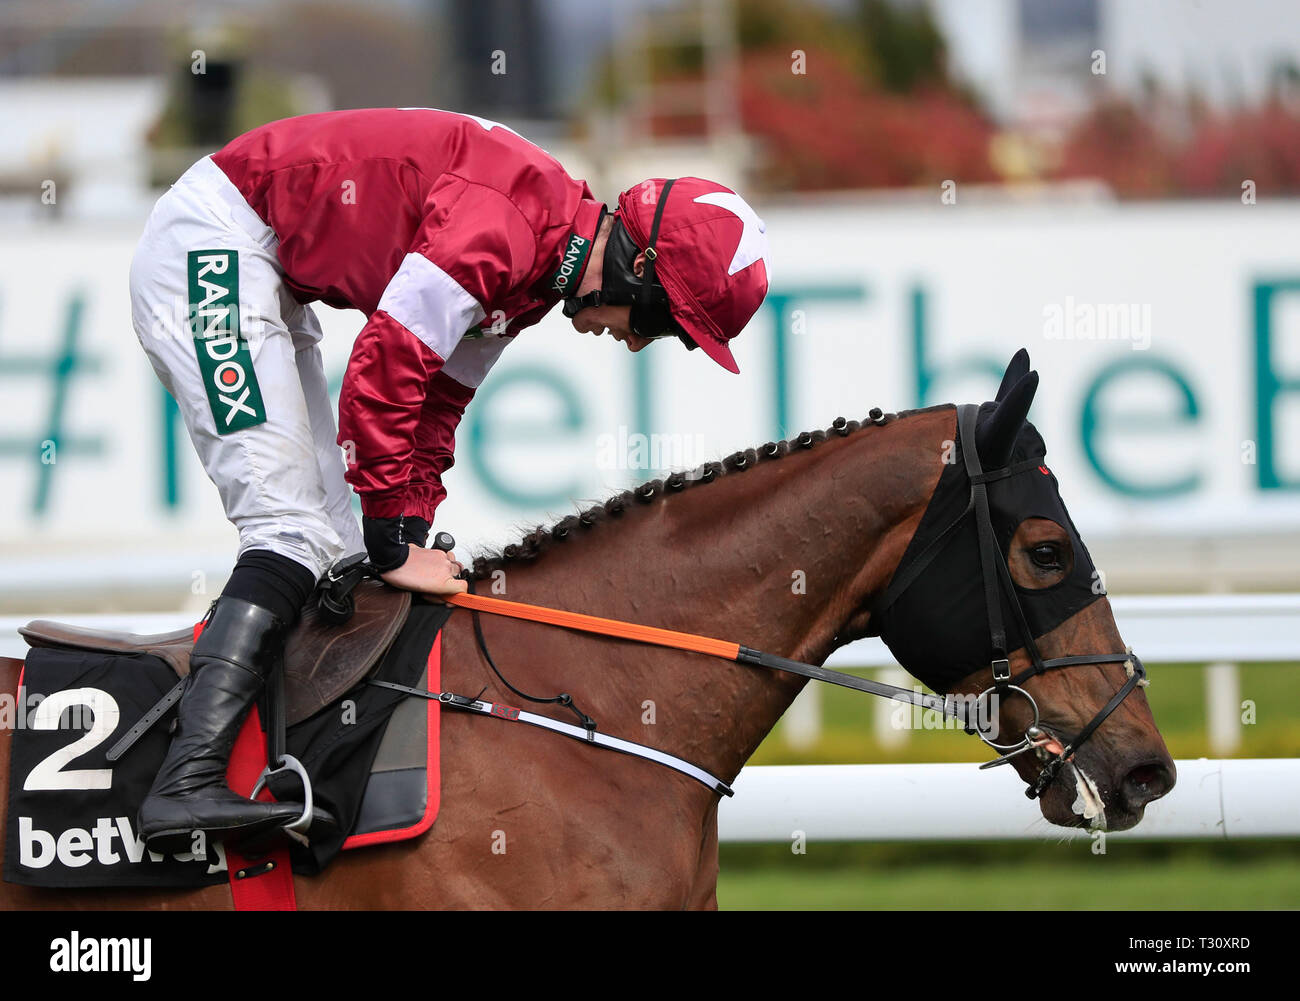 Aintree Racecourse, Aintree, UK. 5th Apr, 2019. The 2019 Grand National horse racing festival, day 2; Felix Desjy ridden by Jack Kennedy wins The Betway Top Novices Hurdle Credit: Action Plus Sports/Alamy Live News Stock Photo